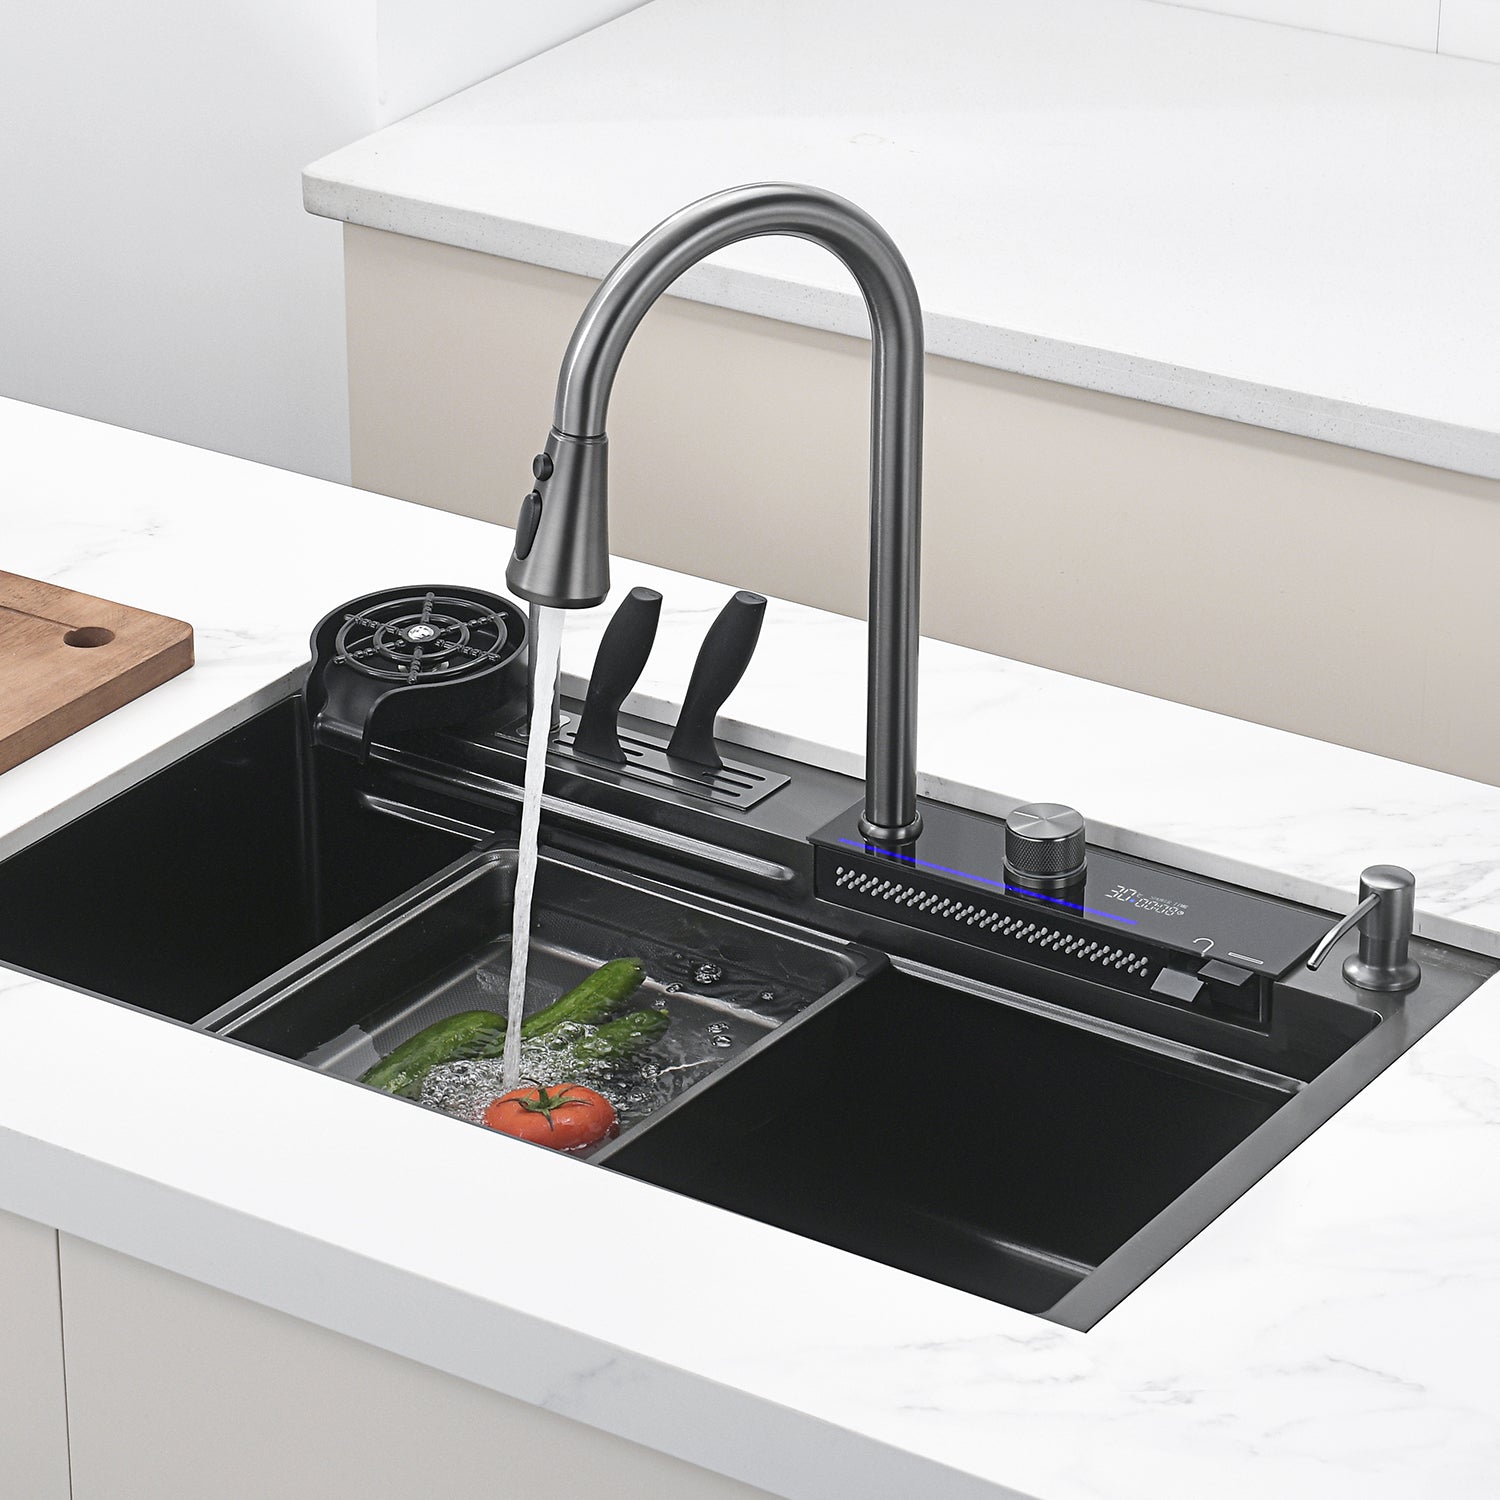 RHINE | Workstation Kitchen Sink Kit with Waterfall Faucet & Digital Temperature Display - SKS2304